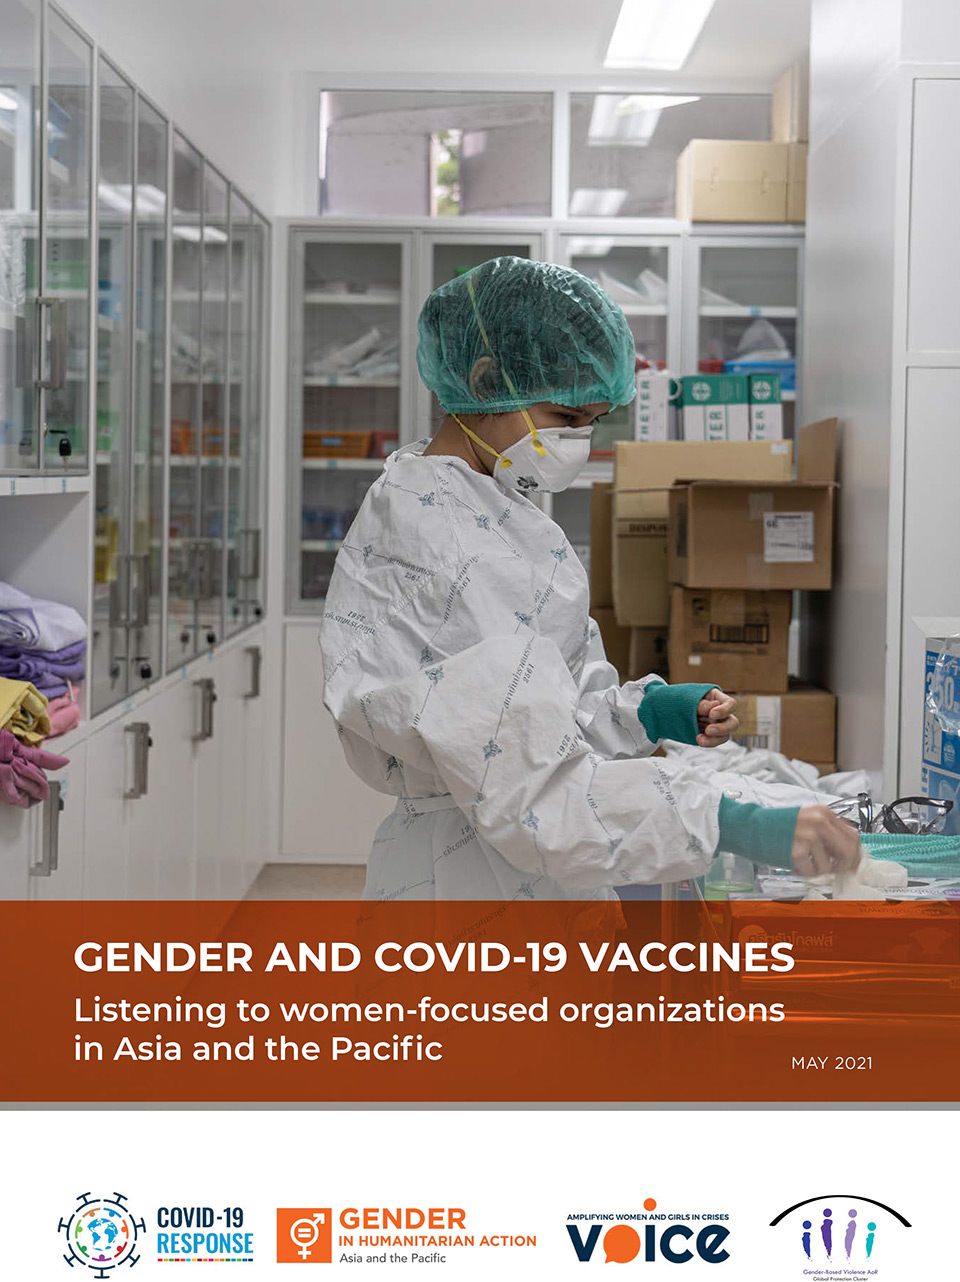 Gender and COVID-19 Vaccines: Listening to Women-Focused Organizations in Asia and the Pacific